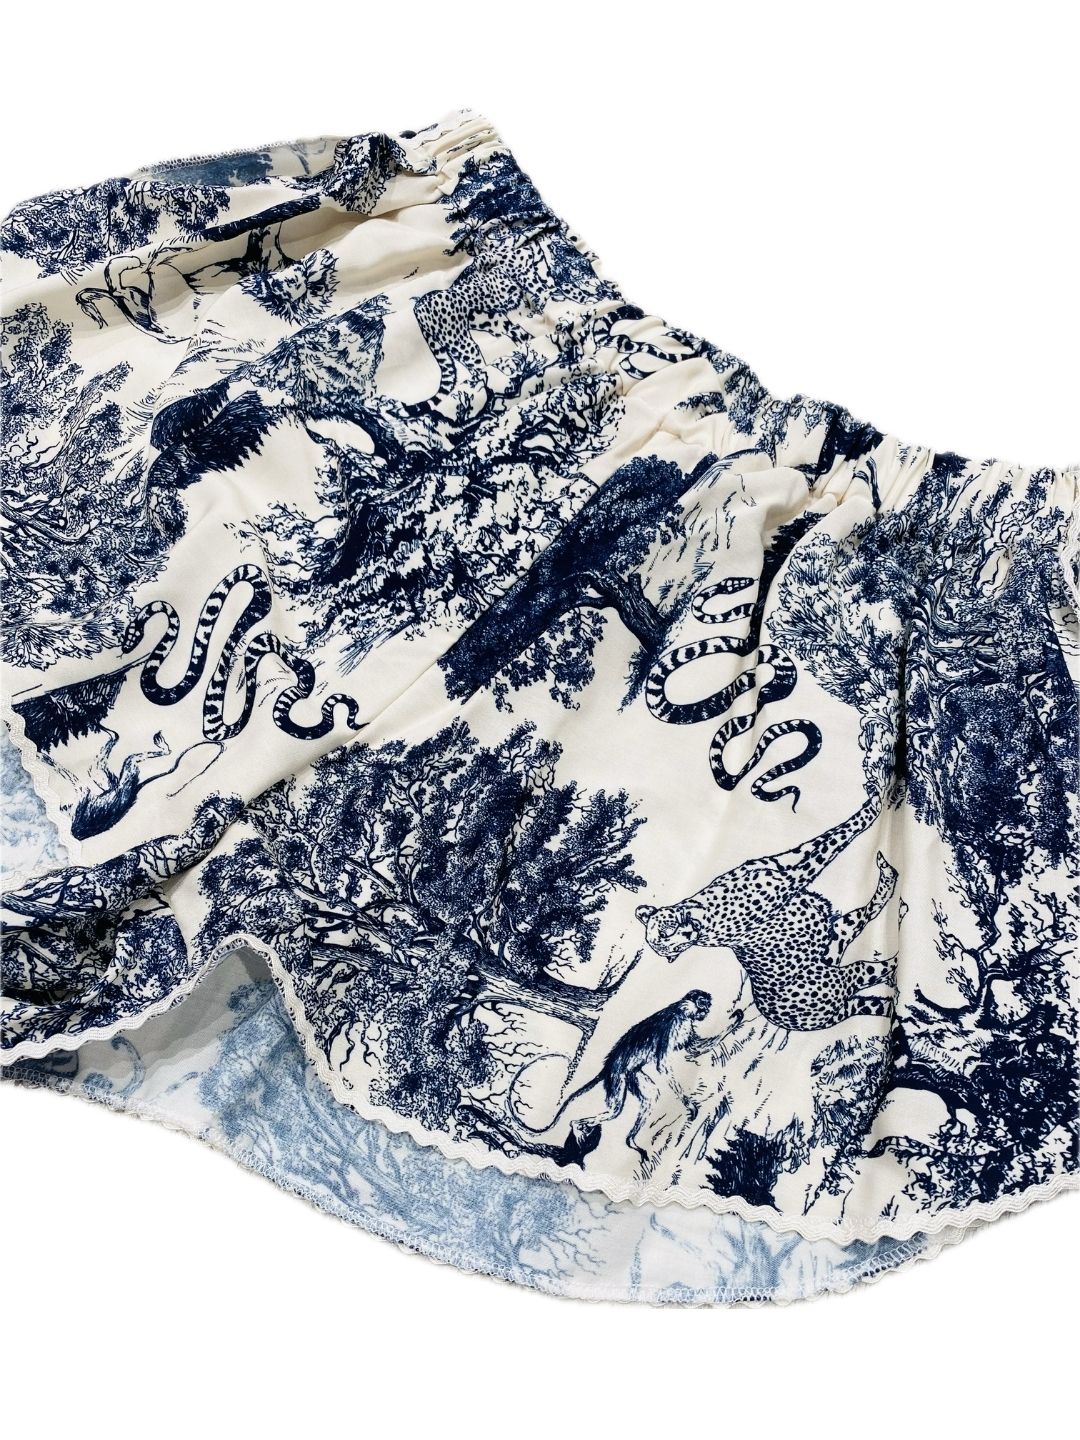 SHORTS TOILE DE JOUY Ribes of LOVE